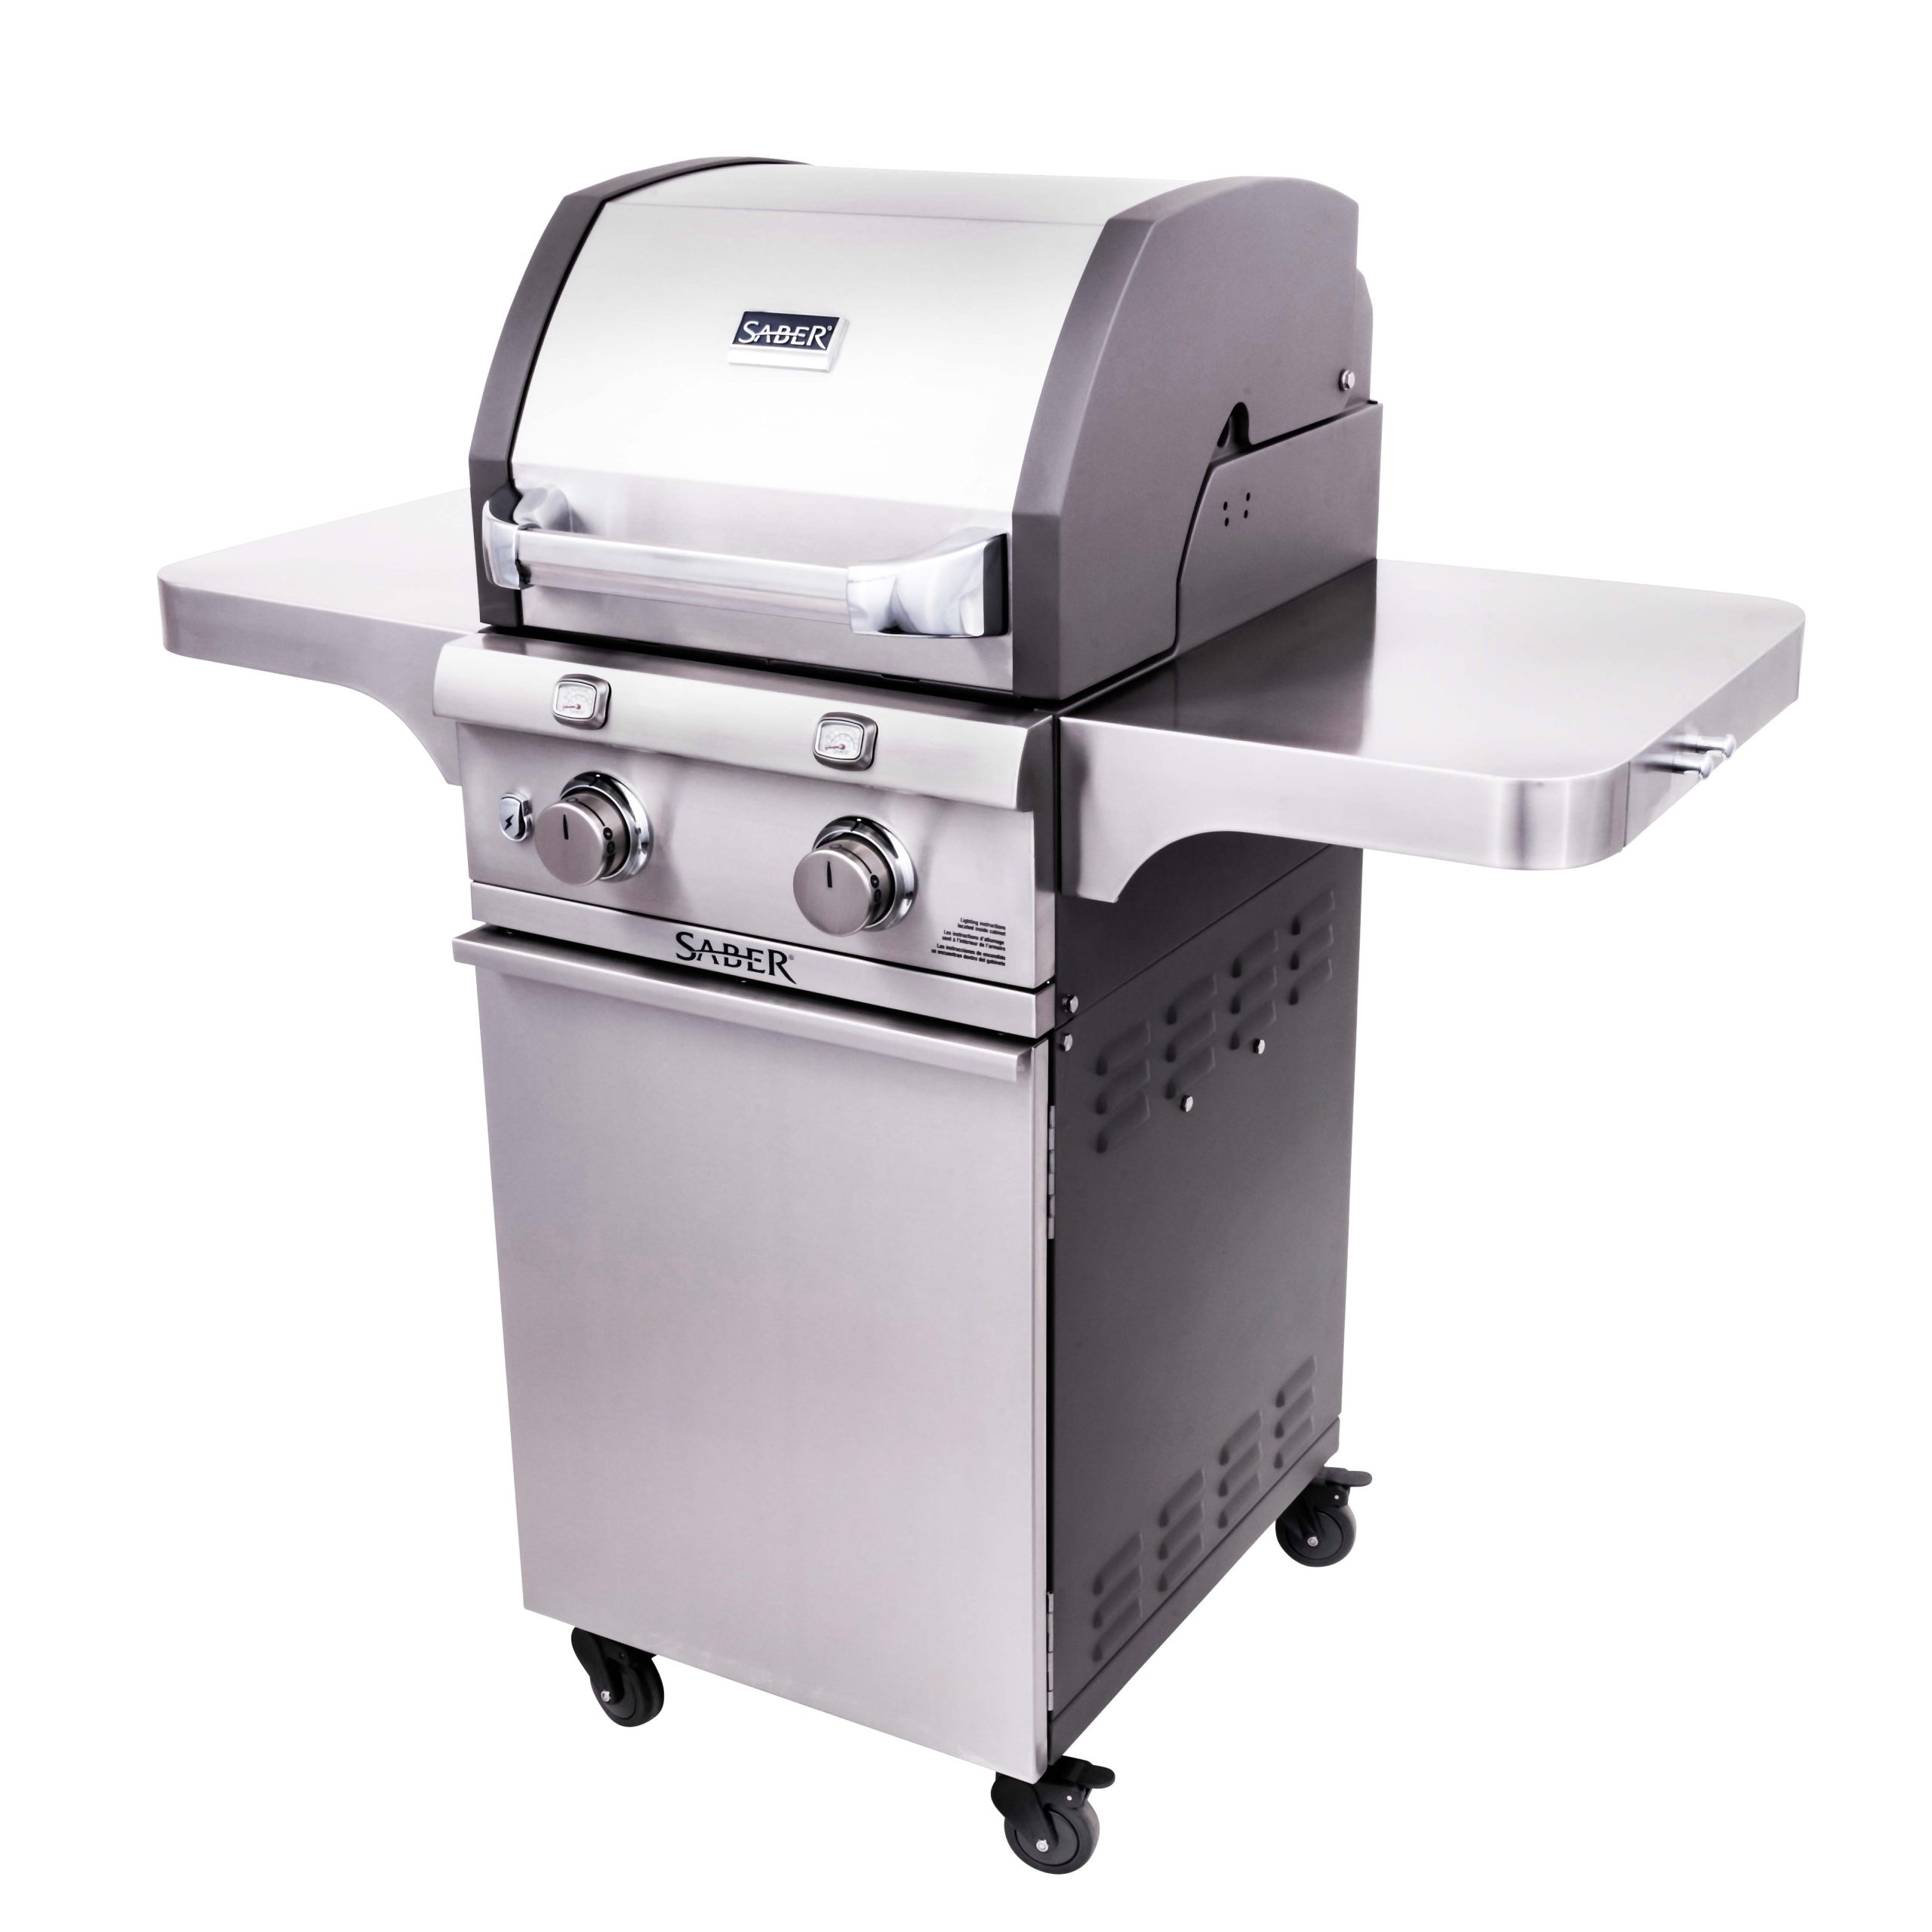 SABER® Cast Stainless 2-burner gas grill for sale